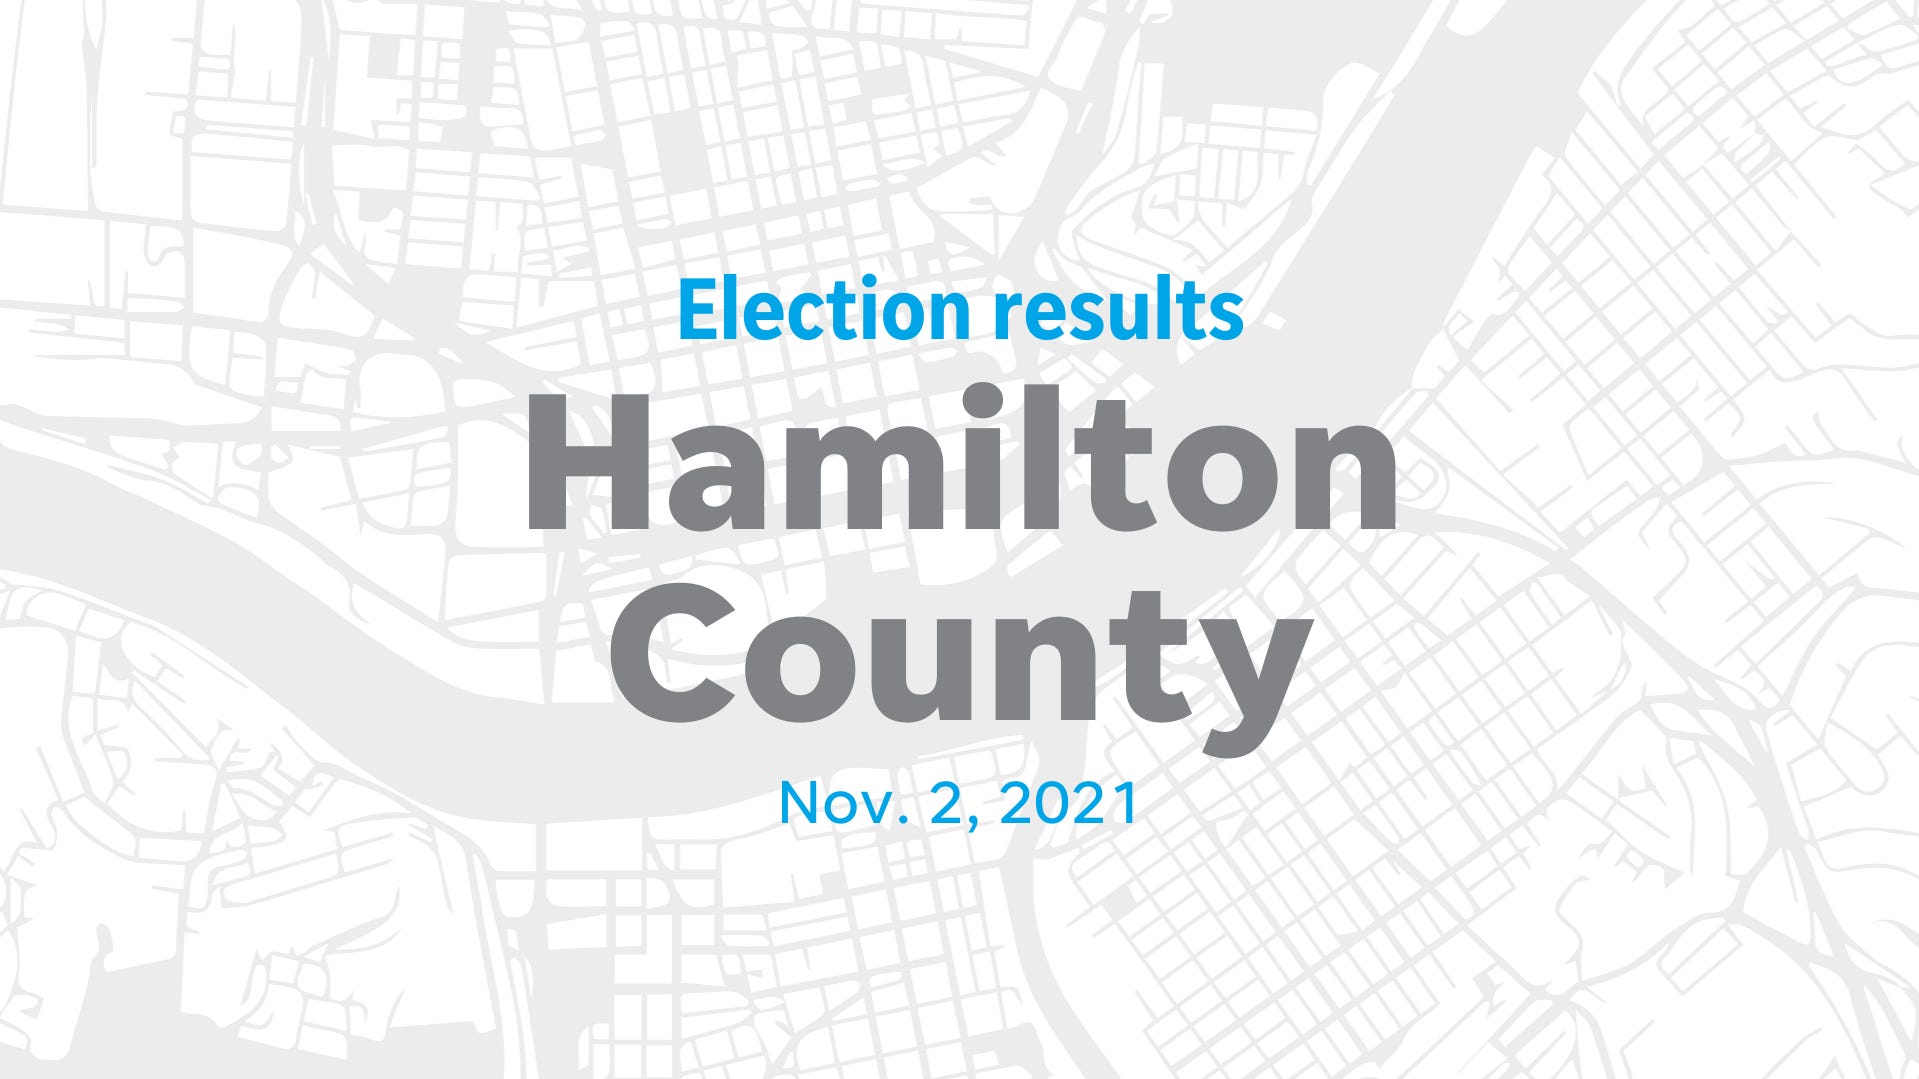 Hamilton County elections results Mayor, city council, Issue 3